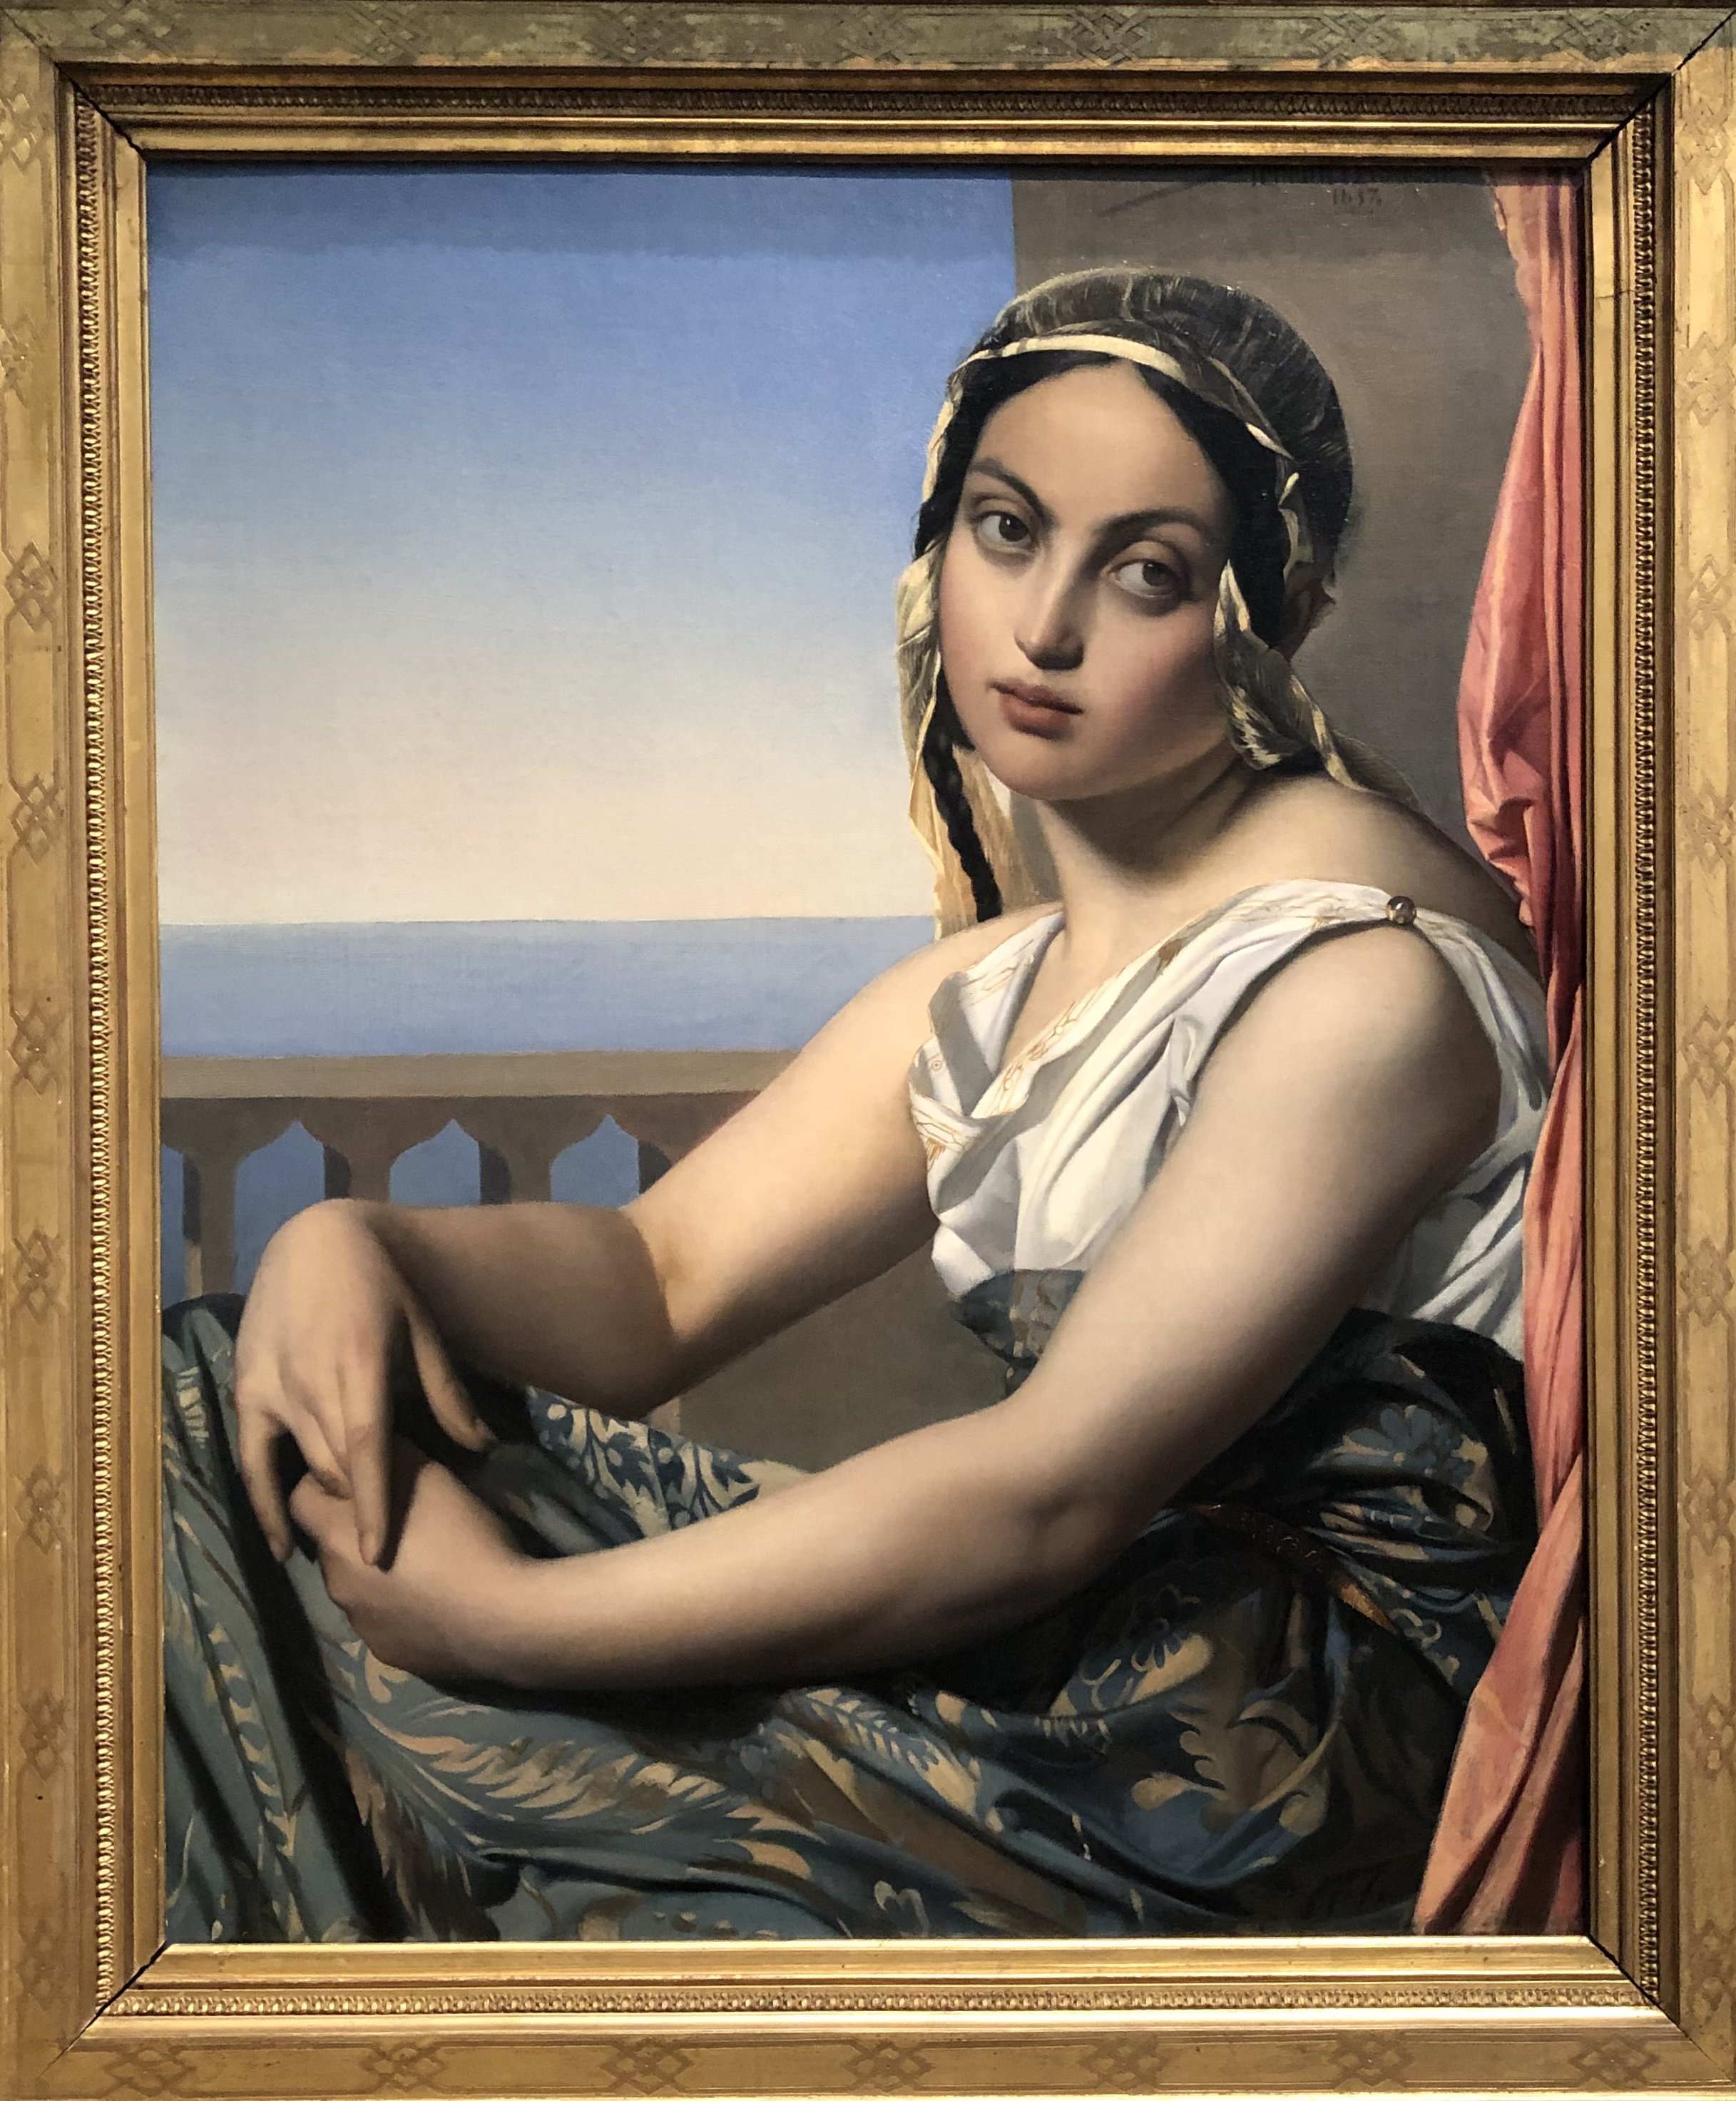 Henri Lehmann's “Woman of the ‘Orient,’” 1837, oil on canvas at the National Gallery of Art in Washington, D.C. , U.S., June 12, 2021. (Photo by Matt Hanson)